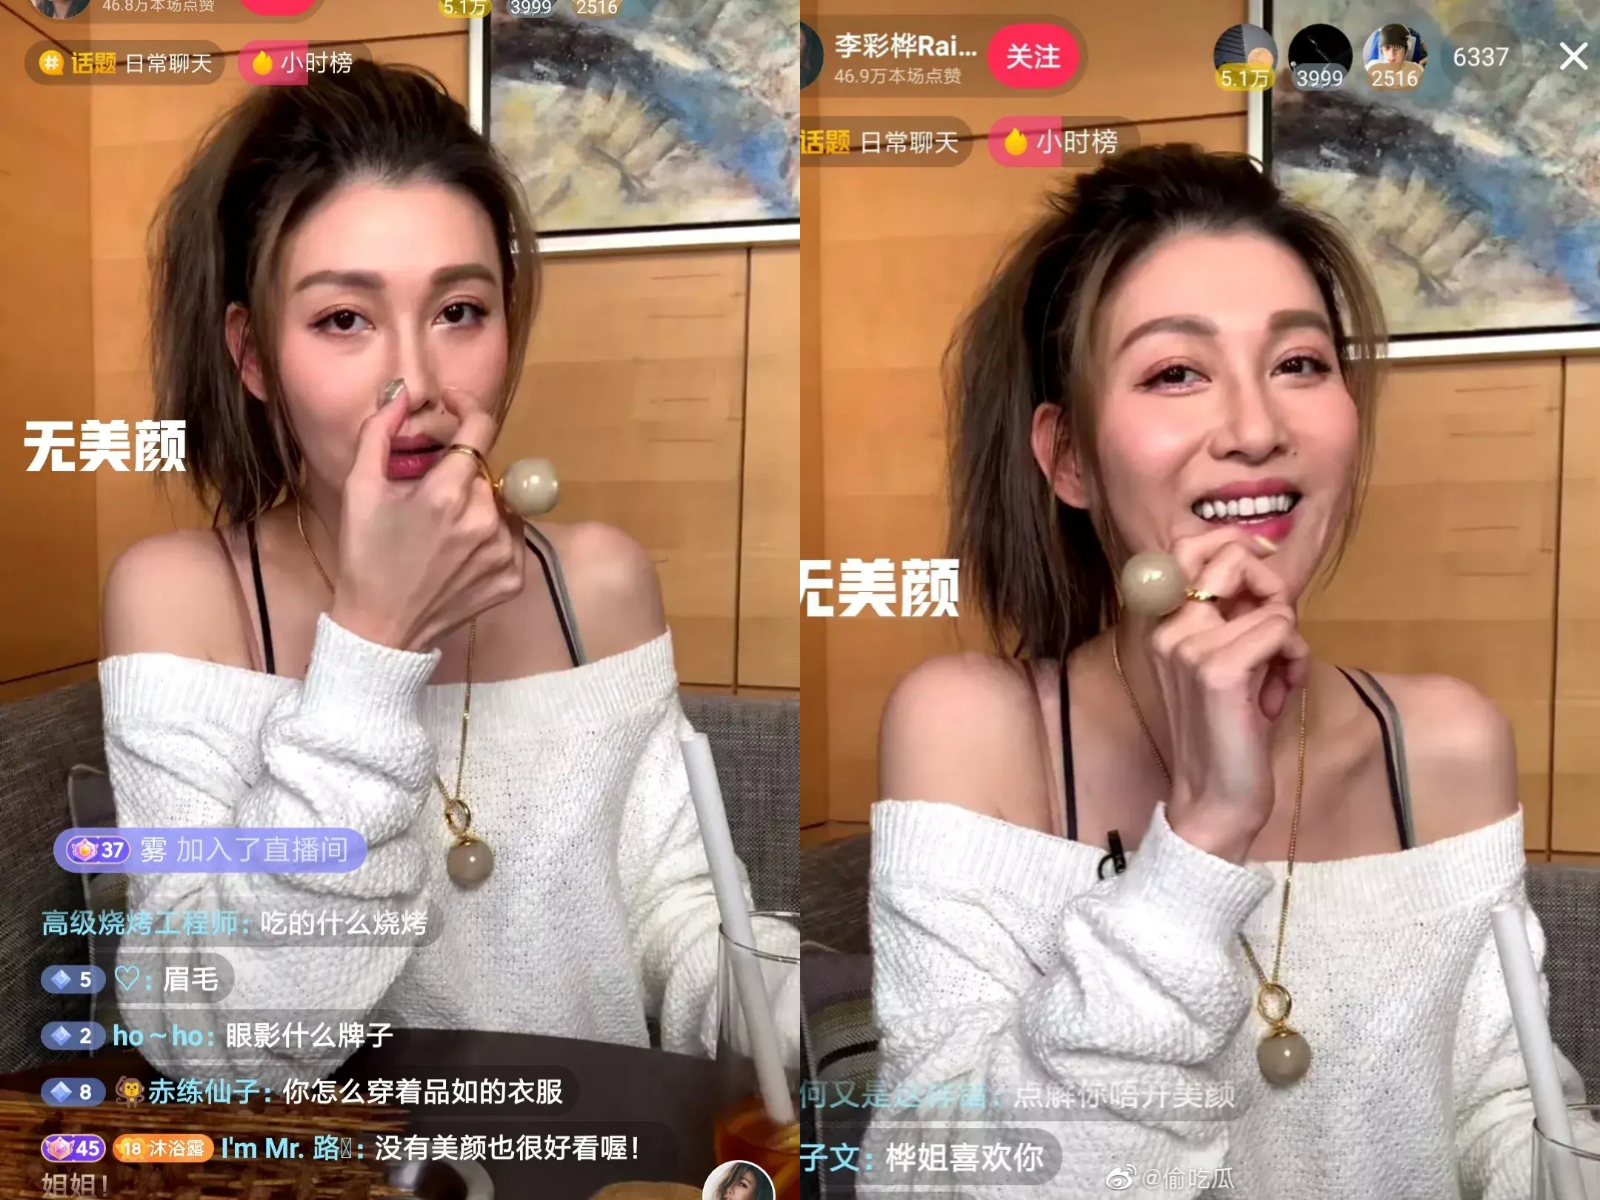 HK Star Rain Li Accidentally Turns Off Beauty Filter During Live Stream;  Netizens Say She Suddenly “Aged By 10 Years” - 8days